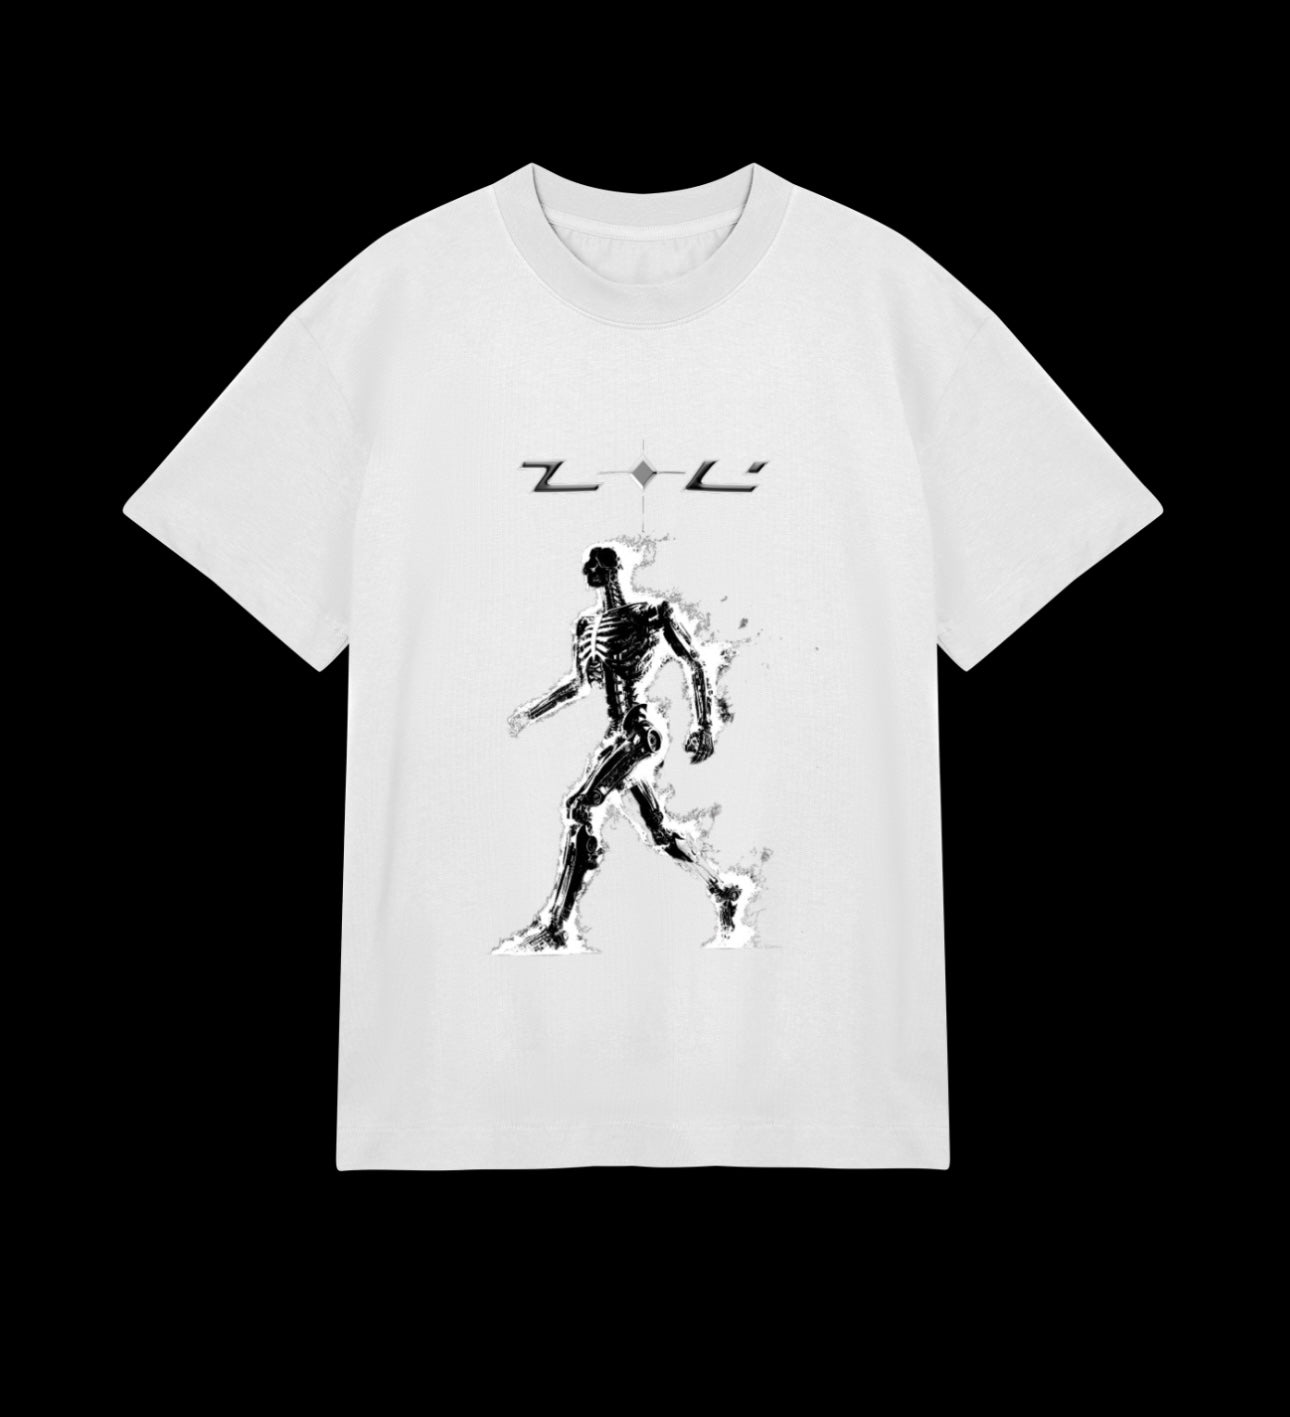 “The Journey” T-Shirt